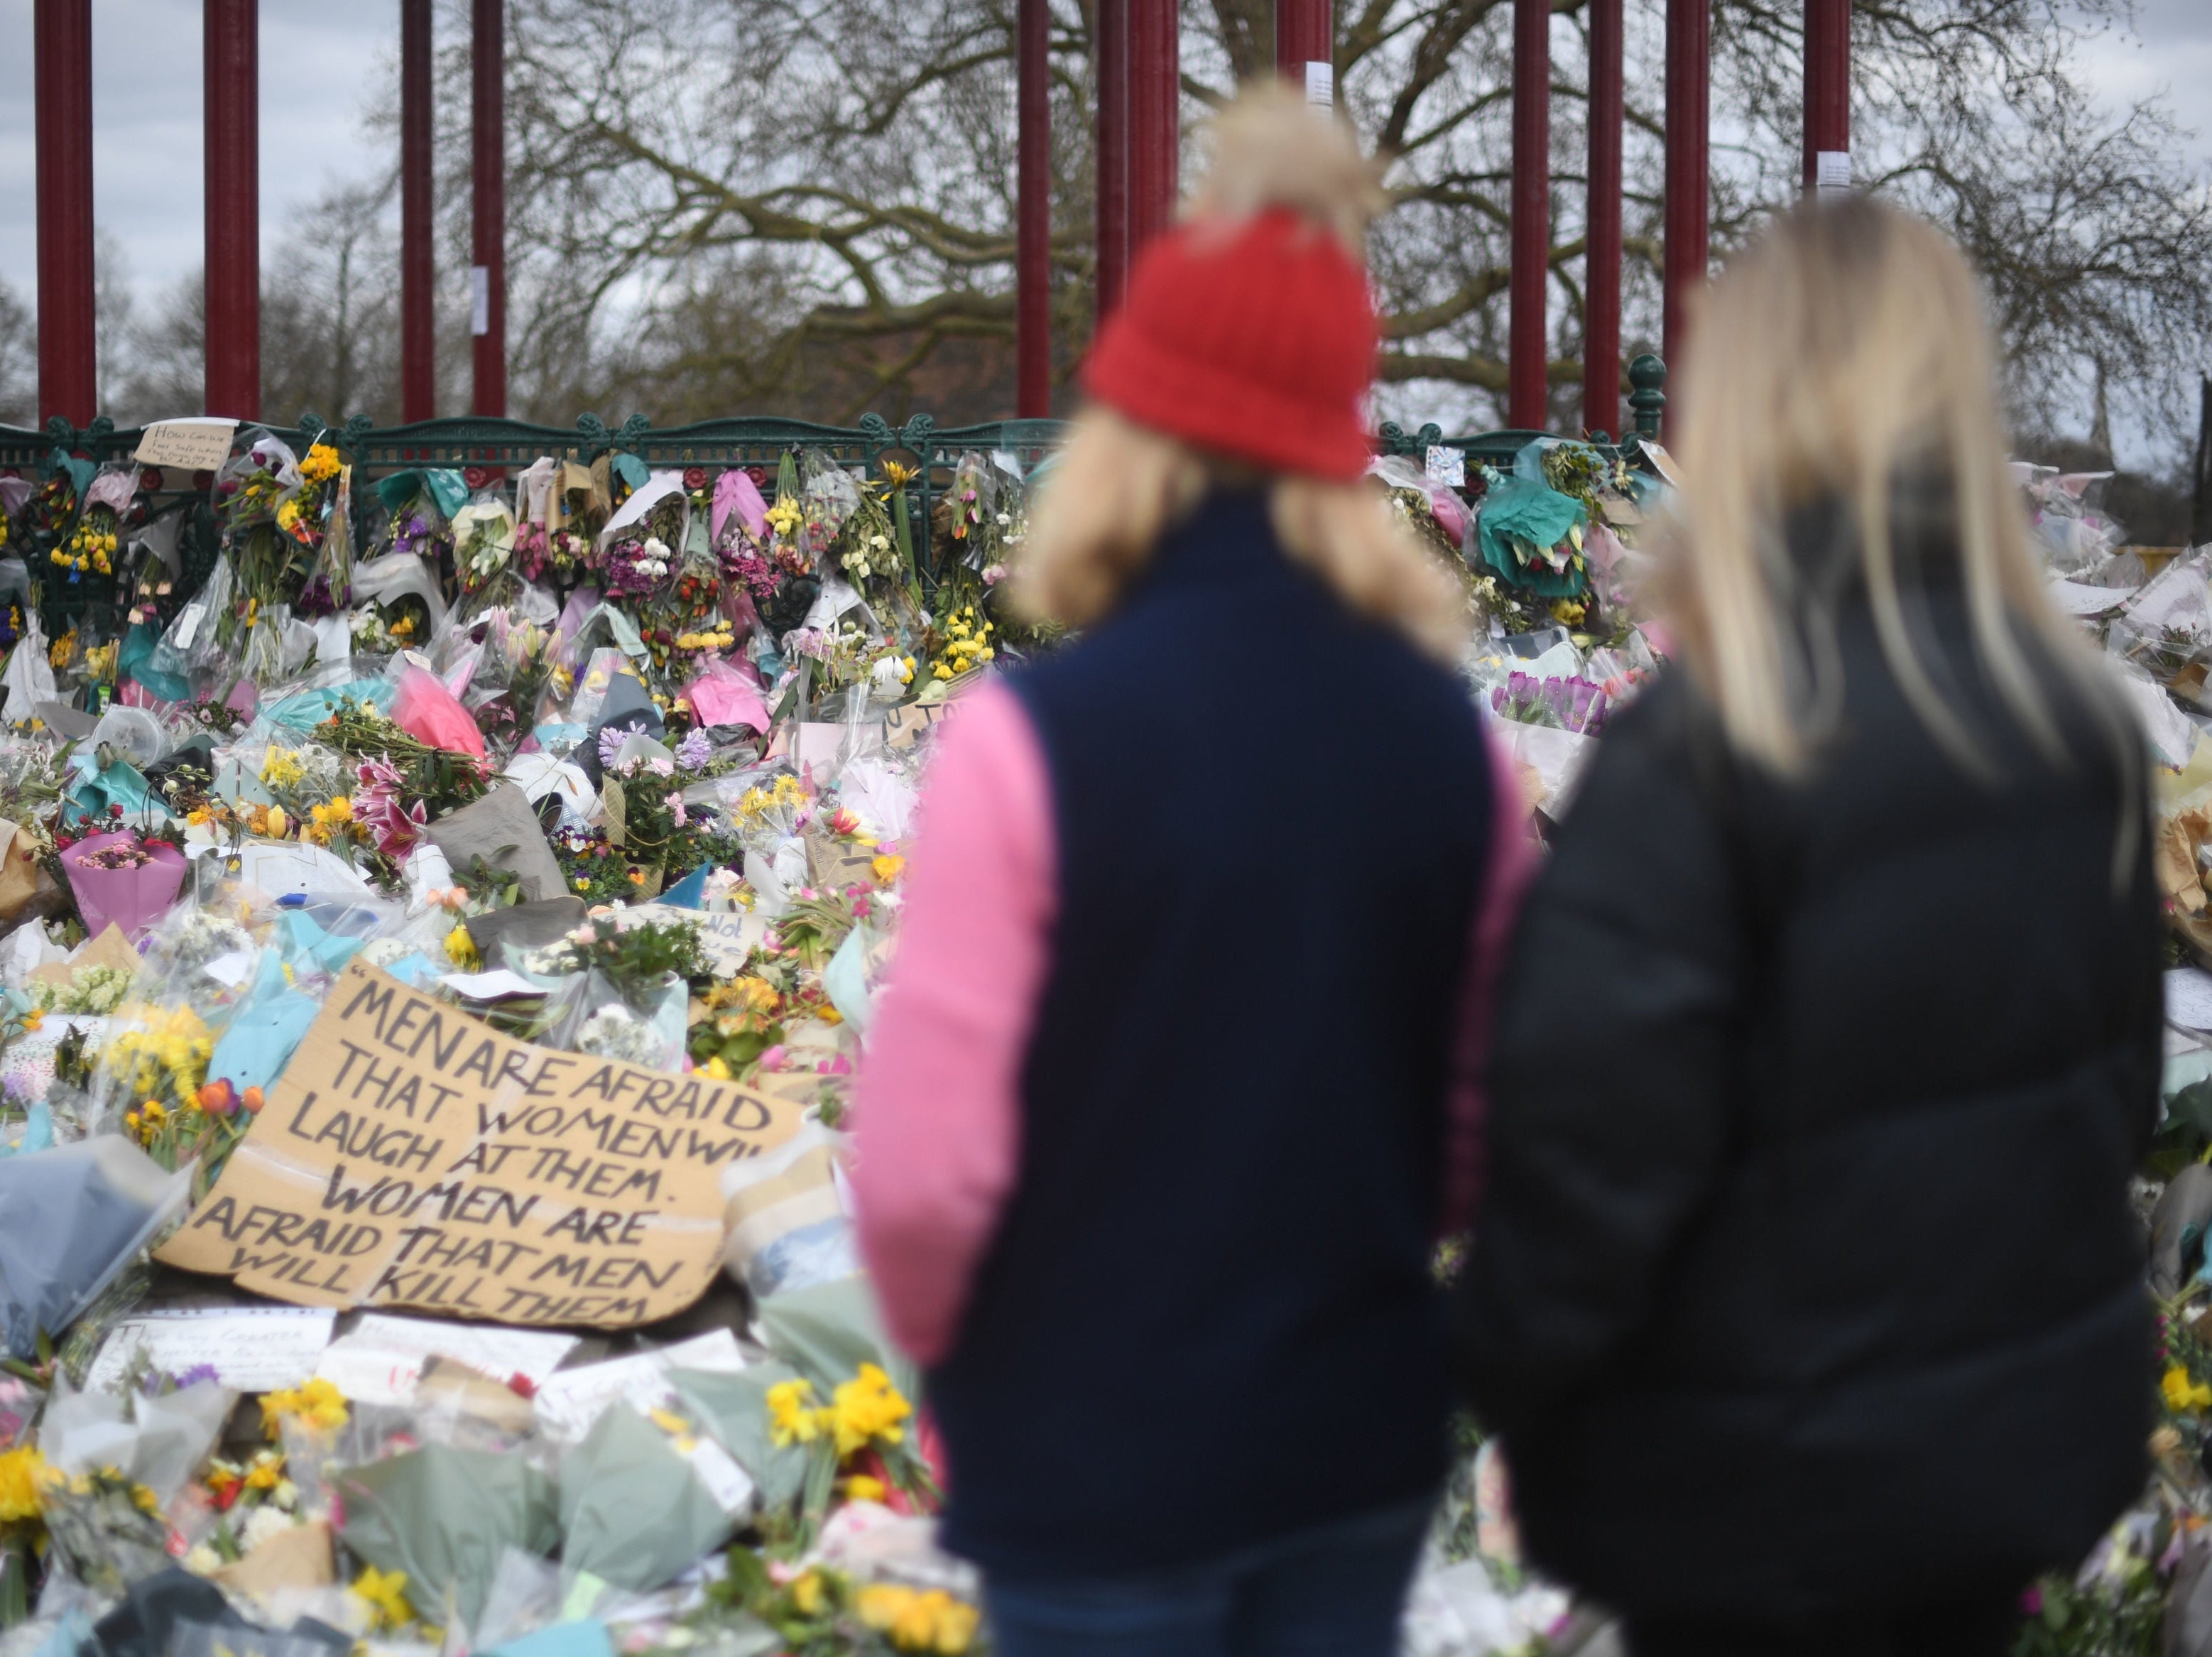 People view floral tributes left at the bandstand in Clapham Common, London, for Sarah Everard